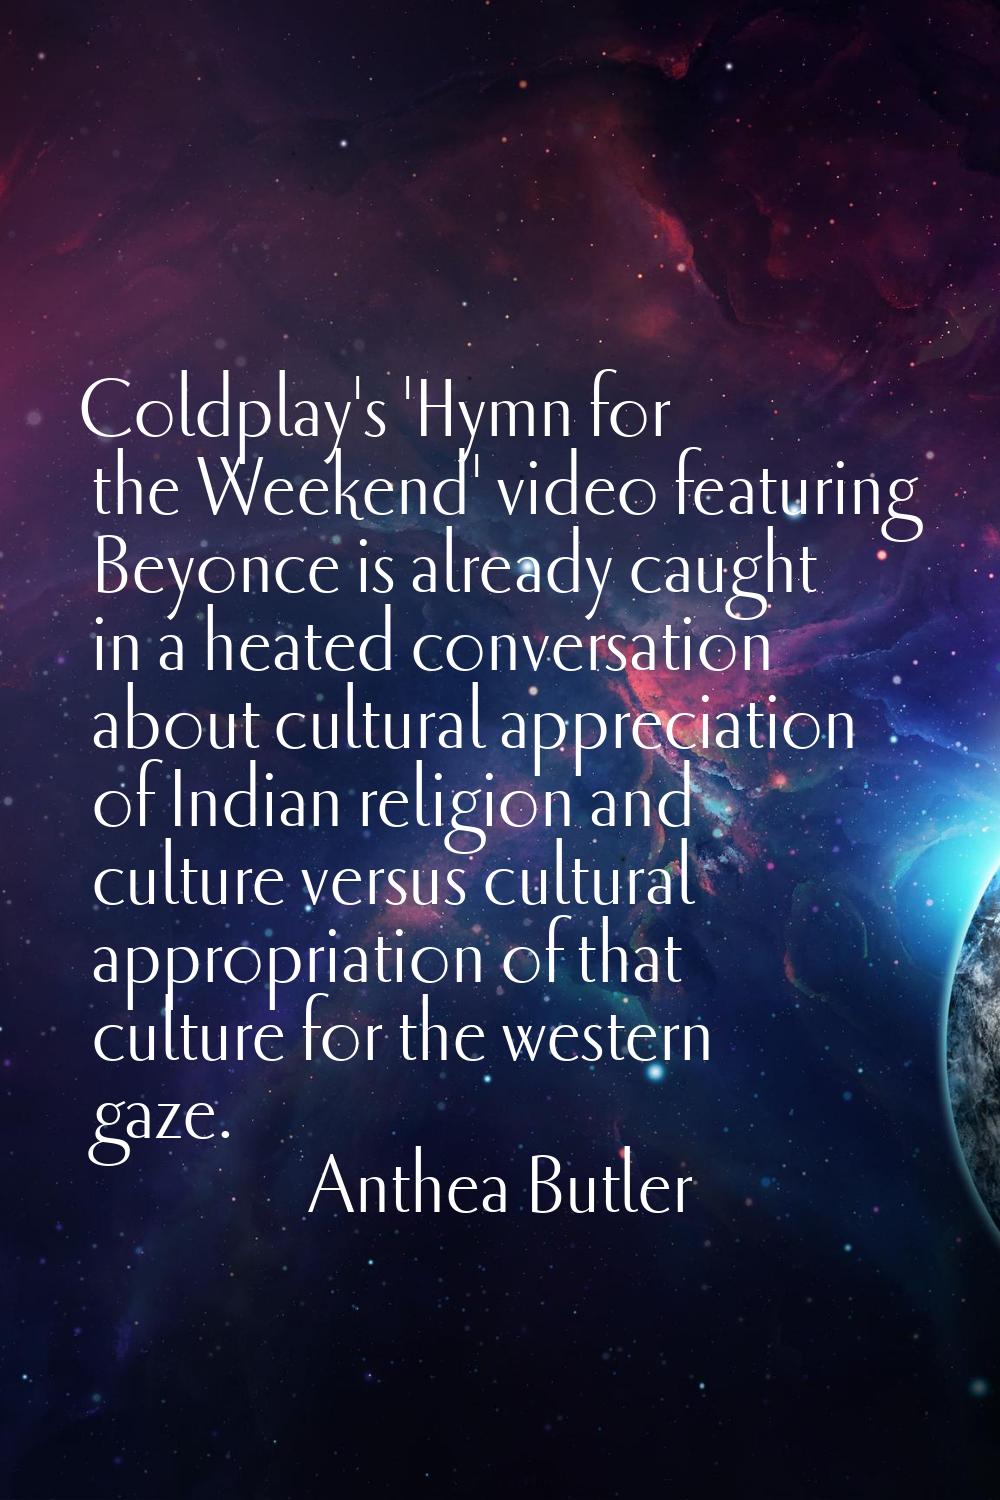 Coldplay's 'Hymn for the Weekend' video featuring Beyonce is already caught in a heated conversatio